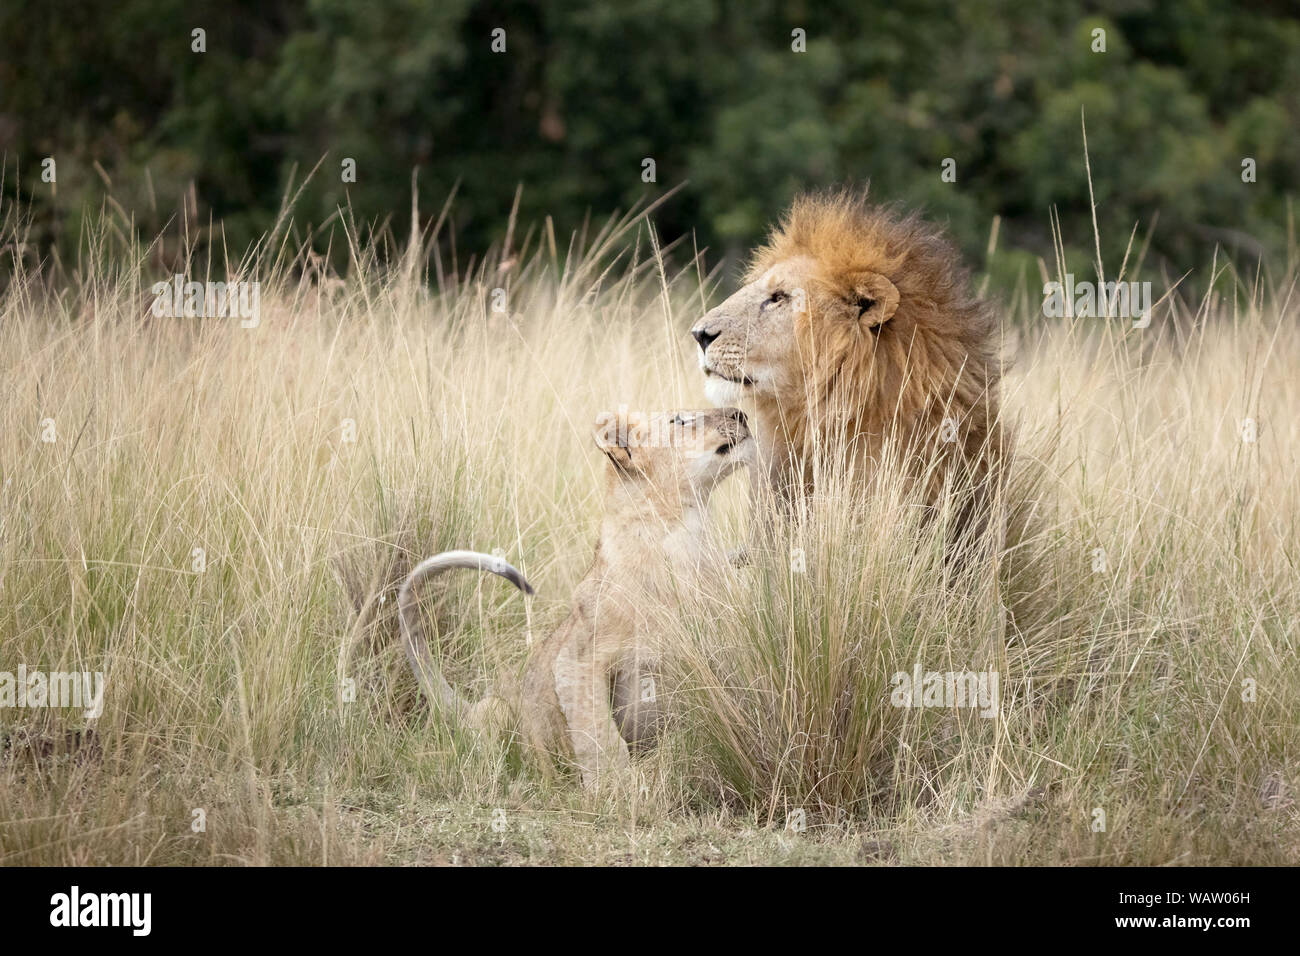 Young lion cub looking up to his father in the long grass of the Masai Mara, Kenya. The adult lion looks prond whilst the cub looks playful. Stock Photo